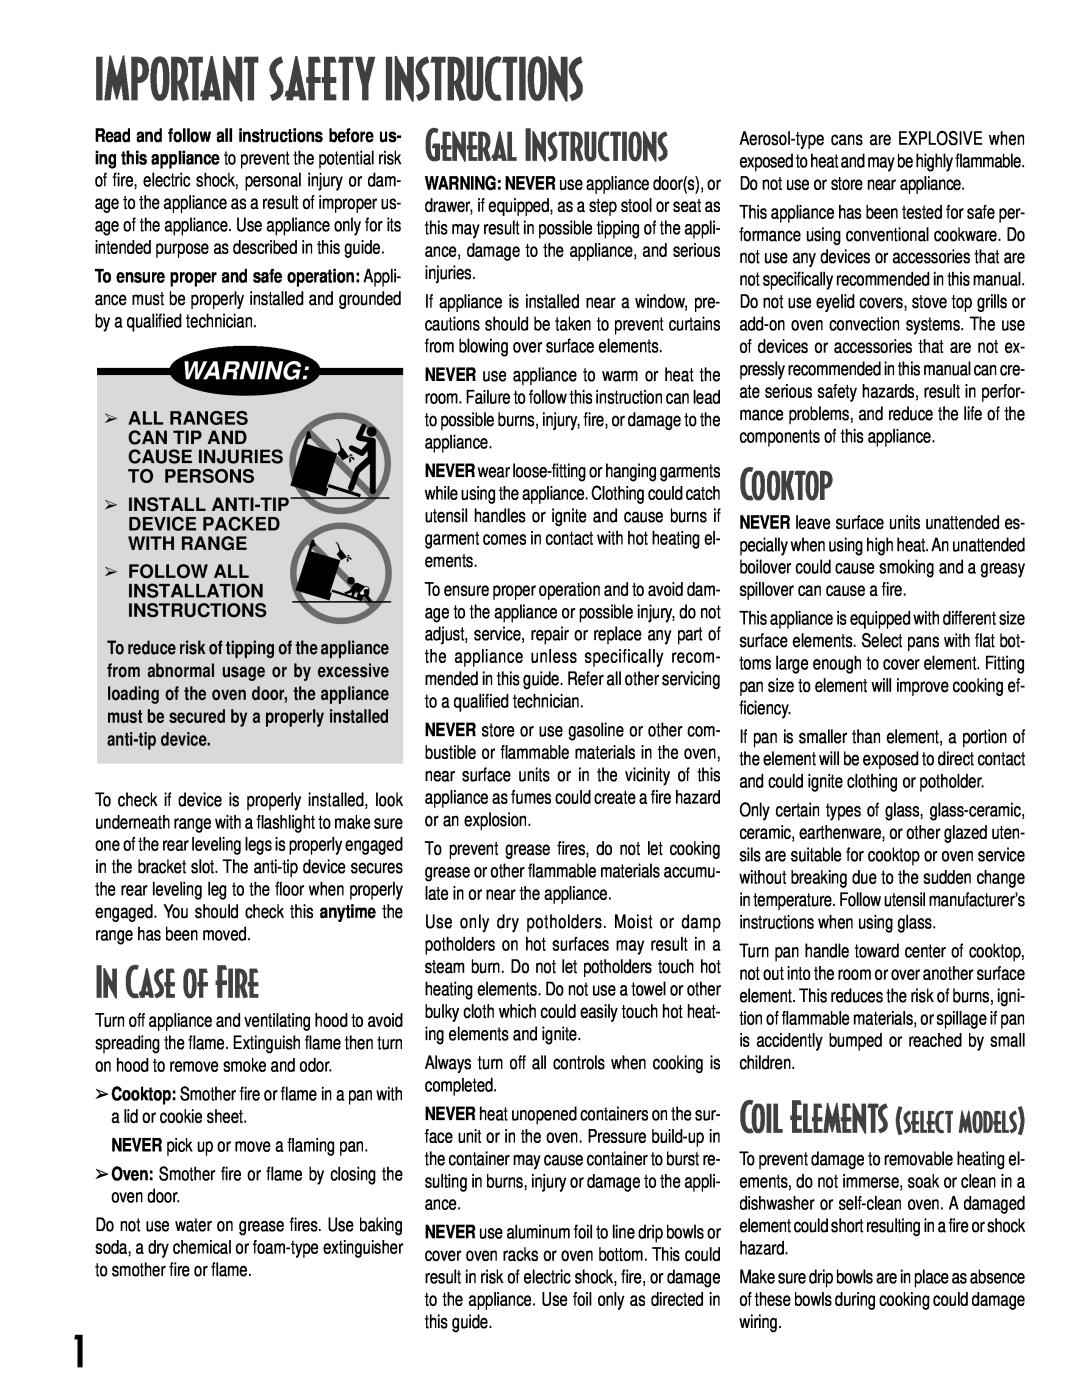 Maytag GEMINITM Important Safety Instructions, In Case of Fire, Cooktop, General Instructions, Coil Elements select models 